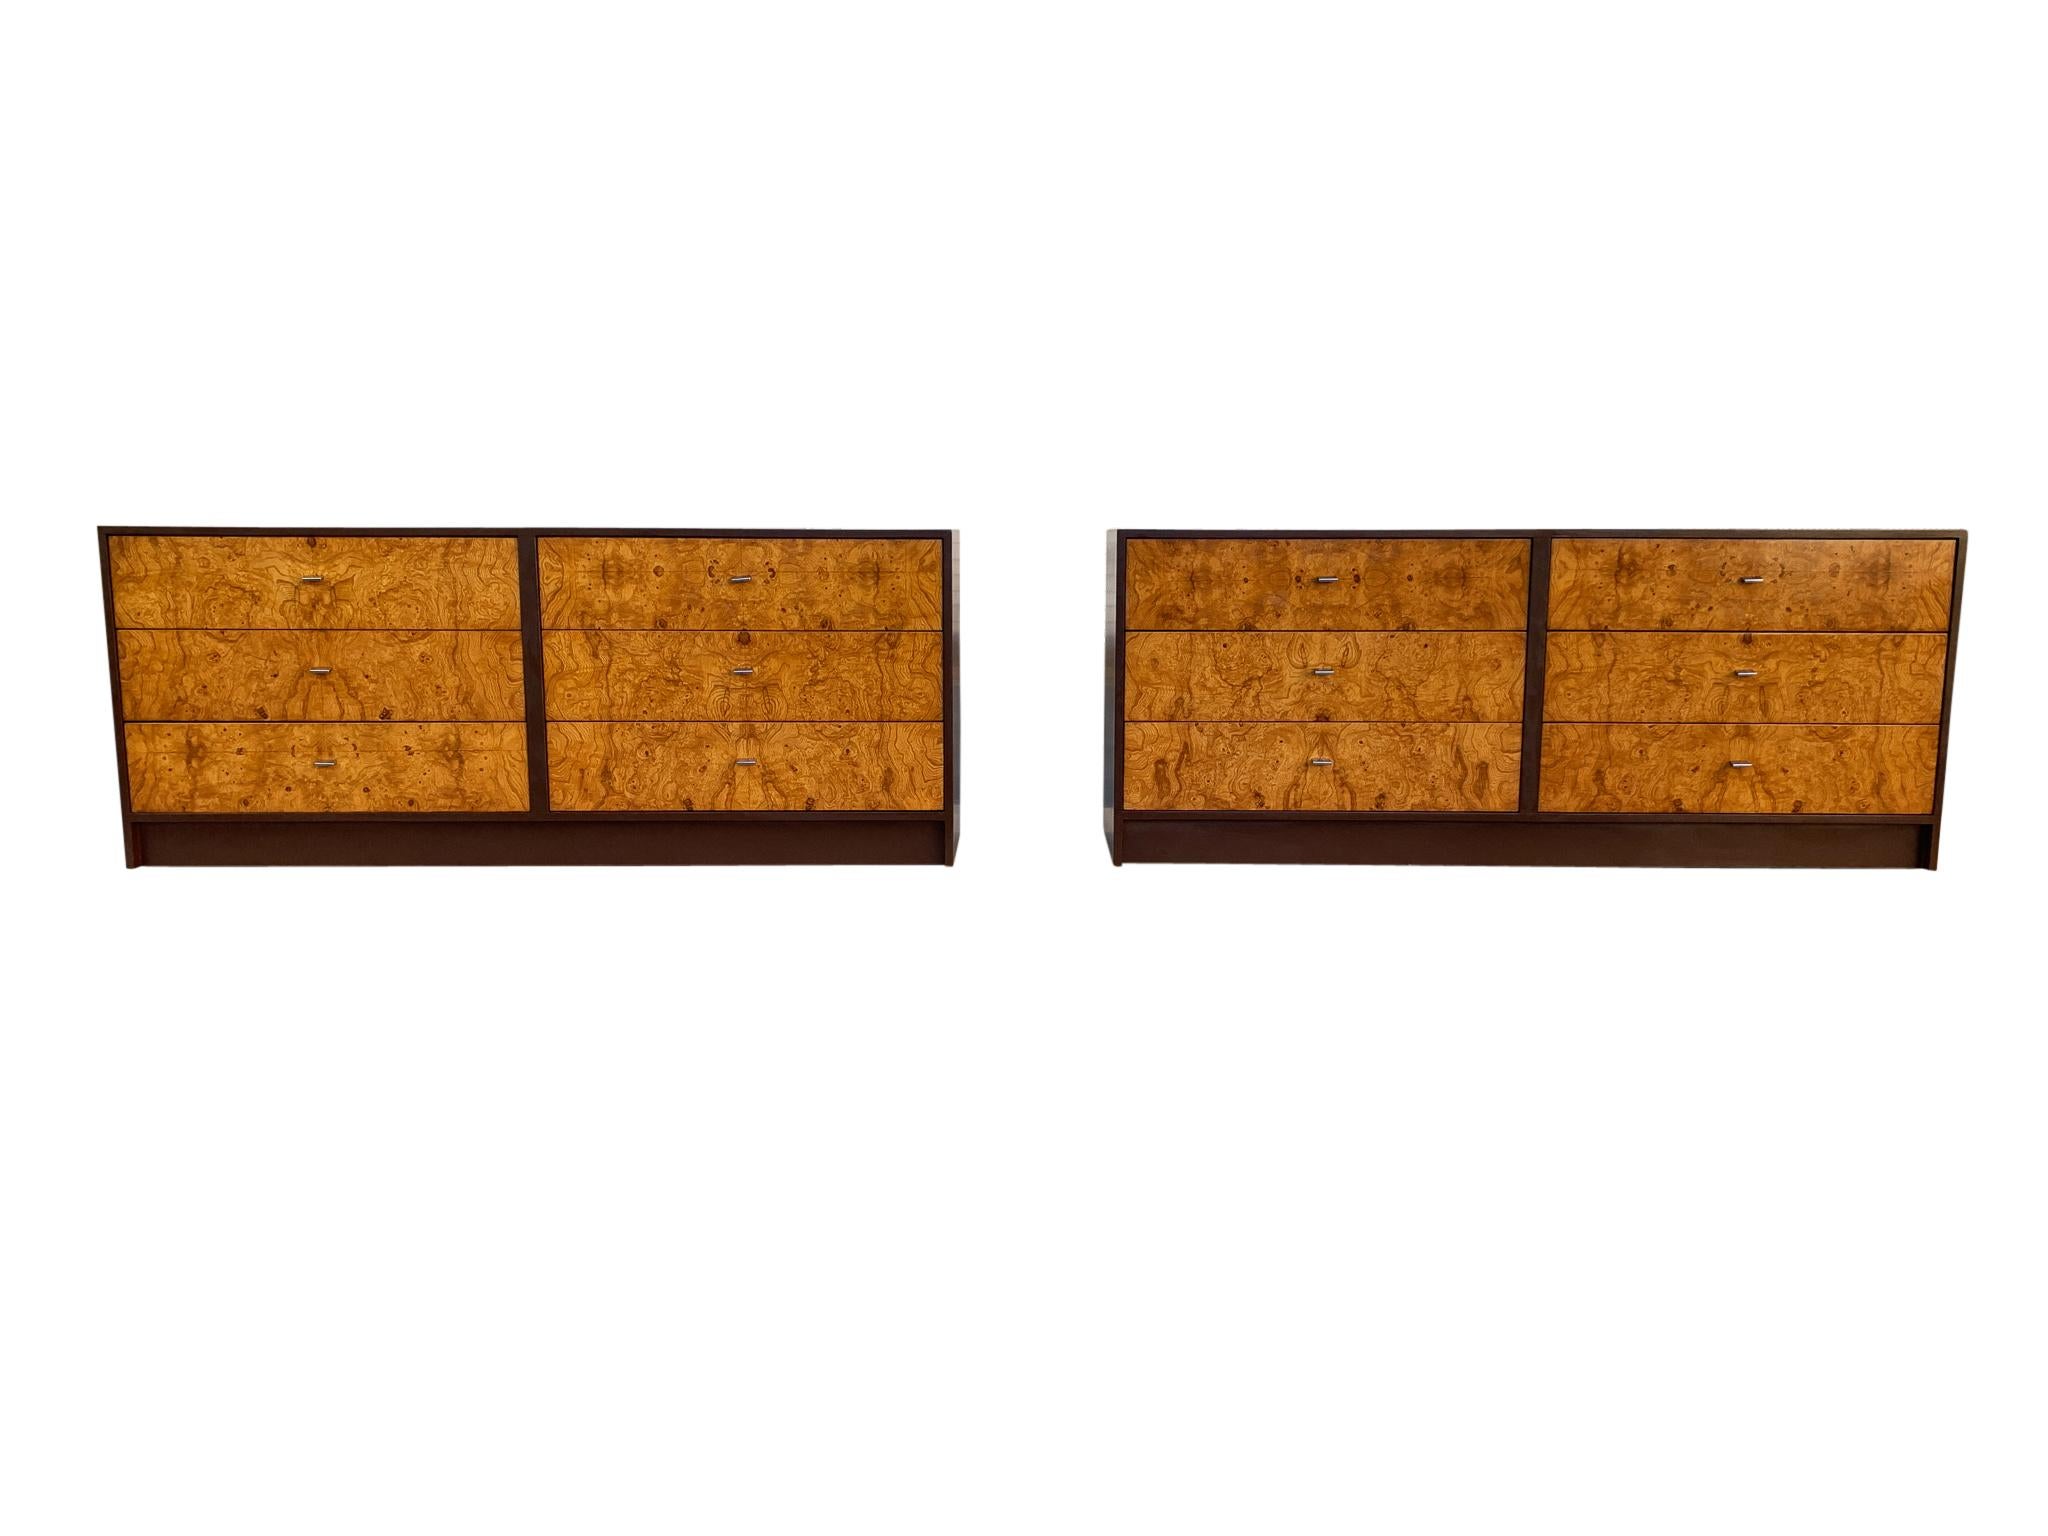 A super handsome and sophisticated pair of six-drawer dressers or credenzas. They feature well-made and freshly refinished brown enamel cases, with beautifully book matched olive-burl drawer fronts, and elegant chrome pulls. The scale, functionality